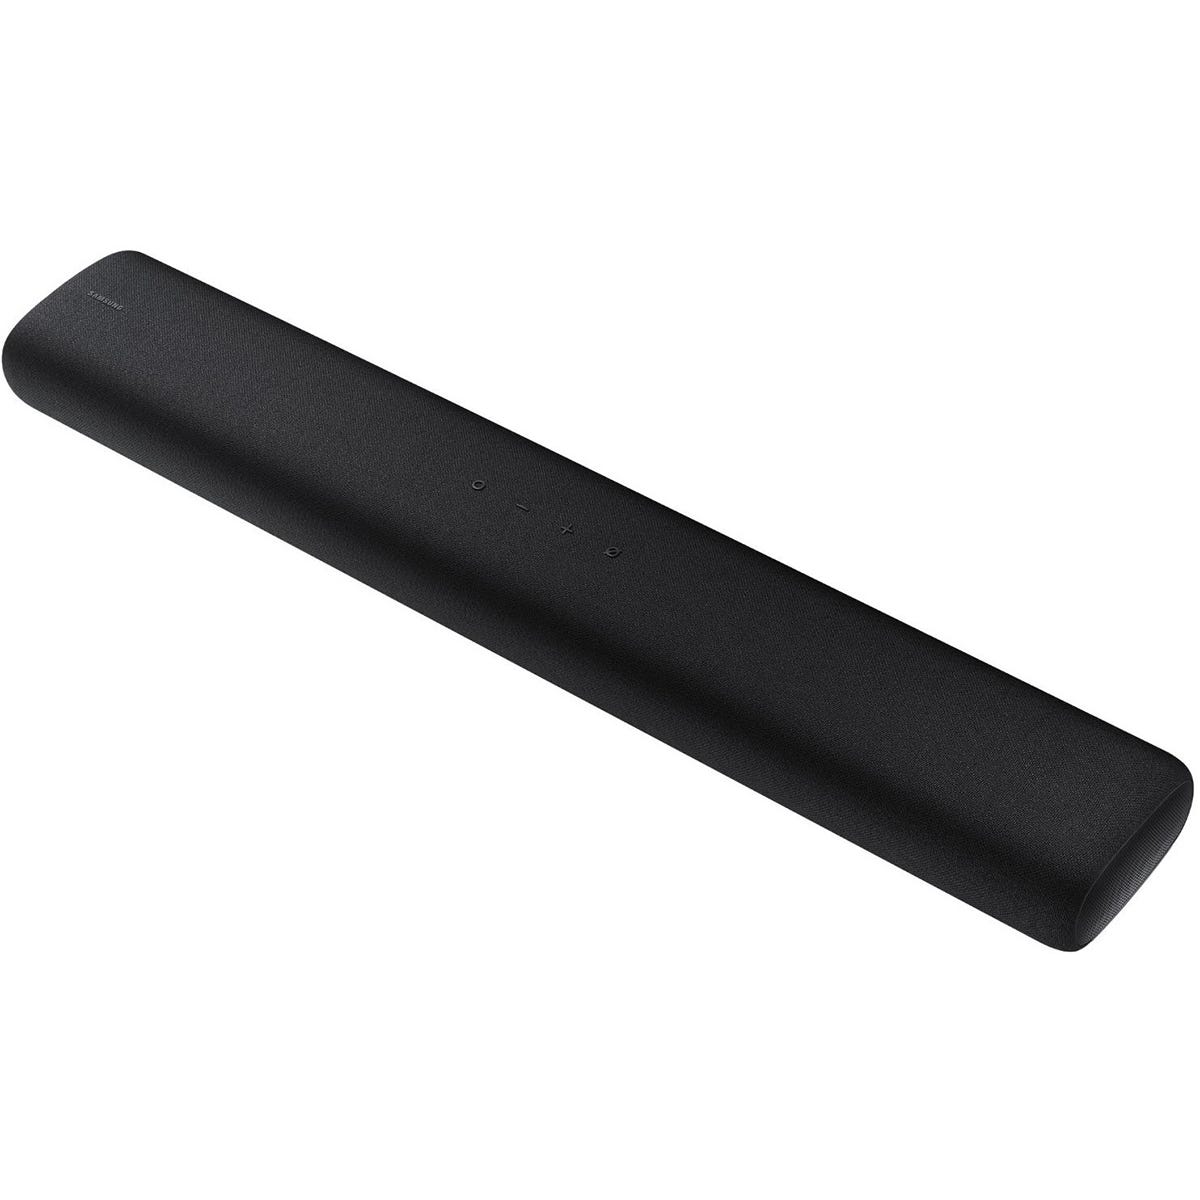 Samsung S60A 5.0ch Lifestyle All-In-One Soundbar with Alexa Voice Control Built-in - Black